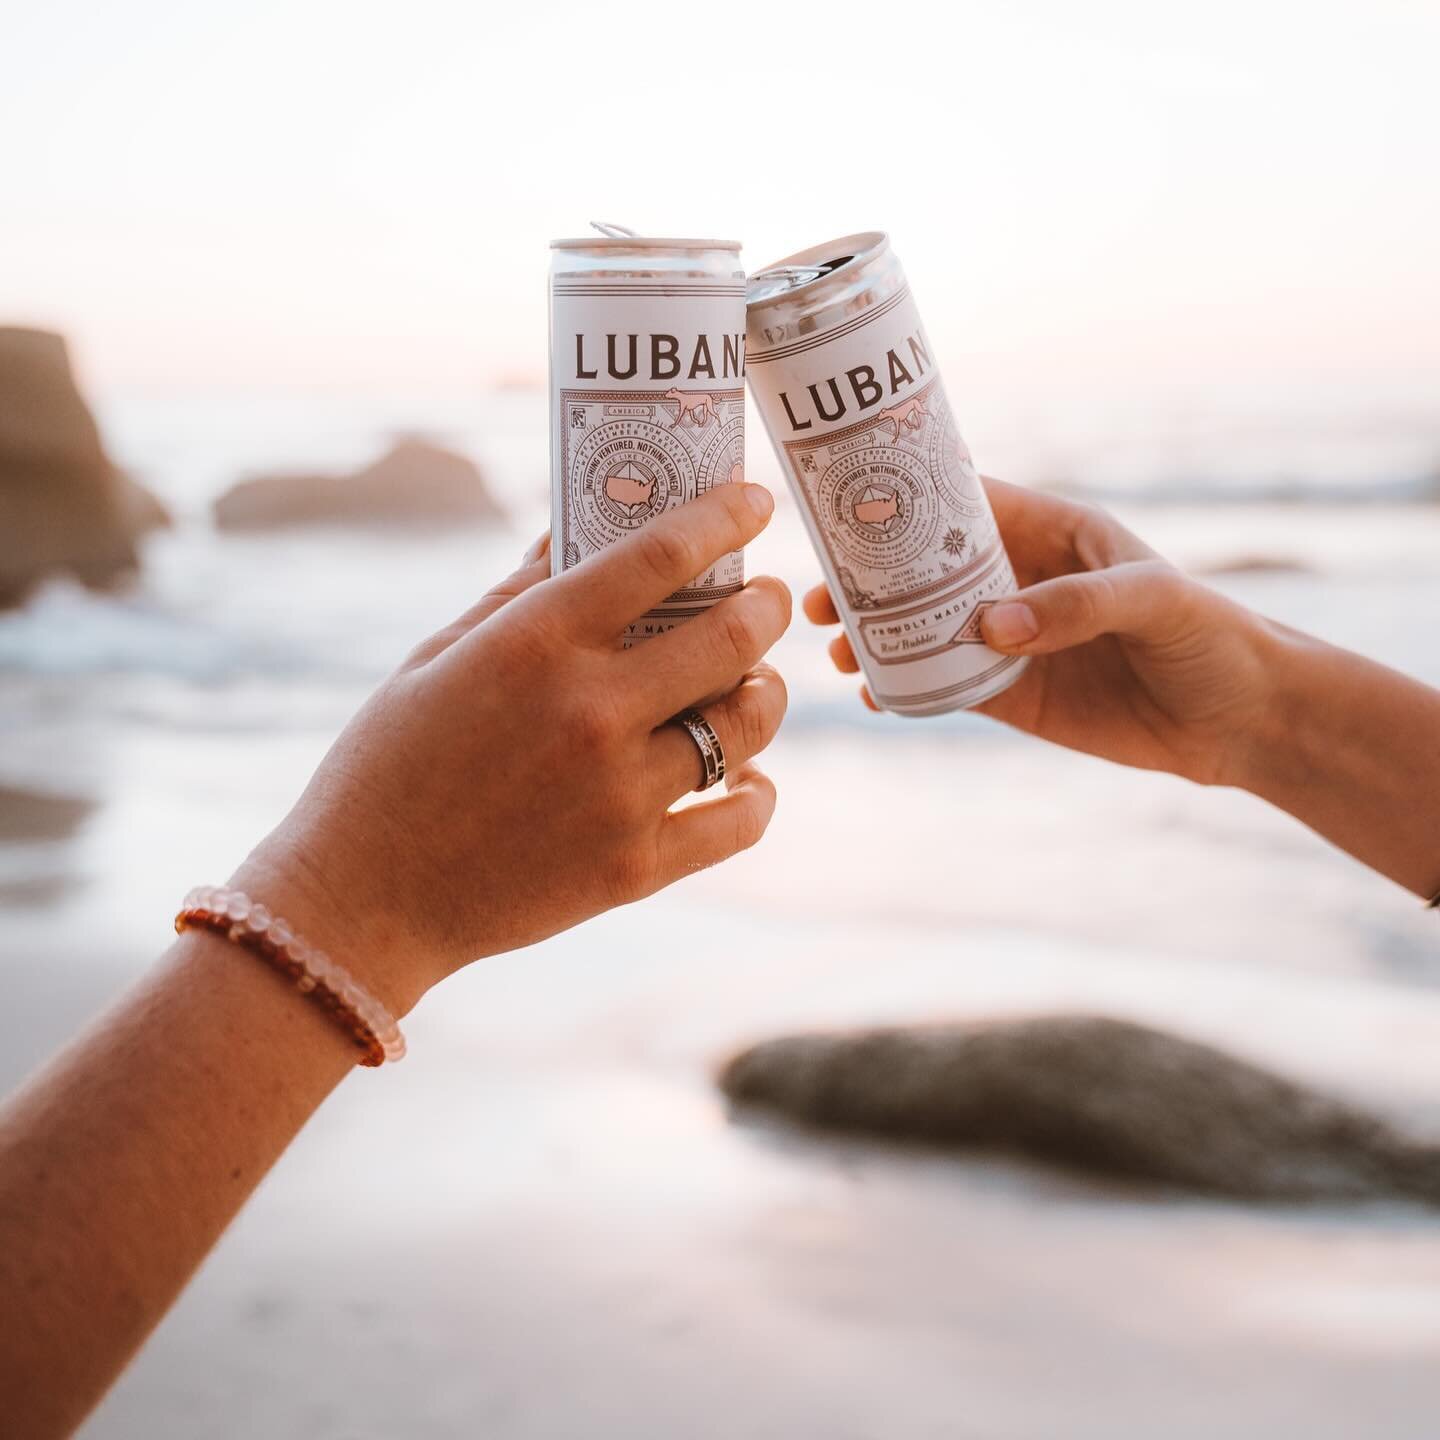 Our final farewell to the last few bits of summer here in Cape Town&hellip; bittersweet, but now we have our eyes on summer state side. 
Canned wine=beach wine 
☀️⛱️🍇🍾